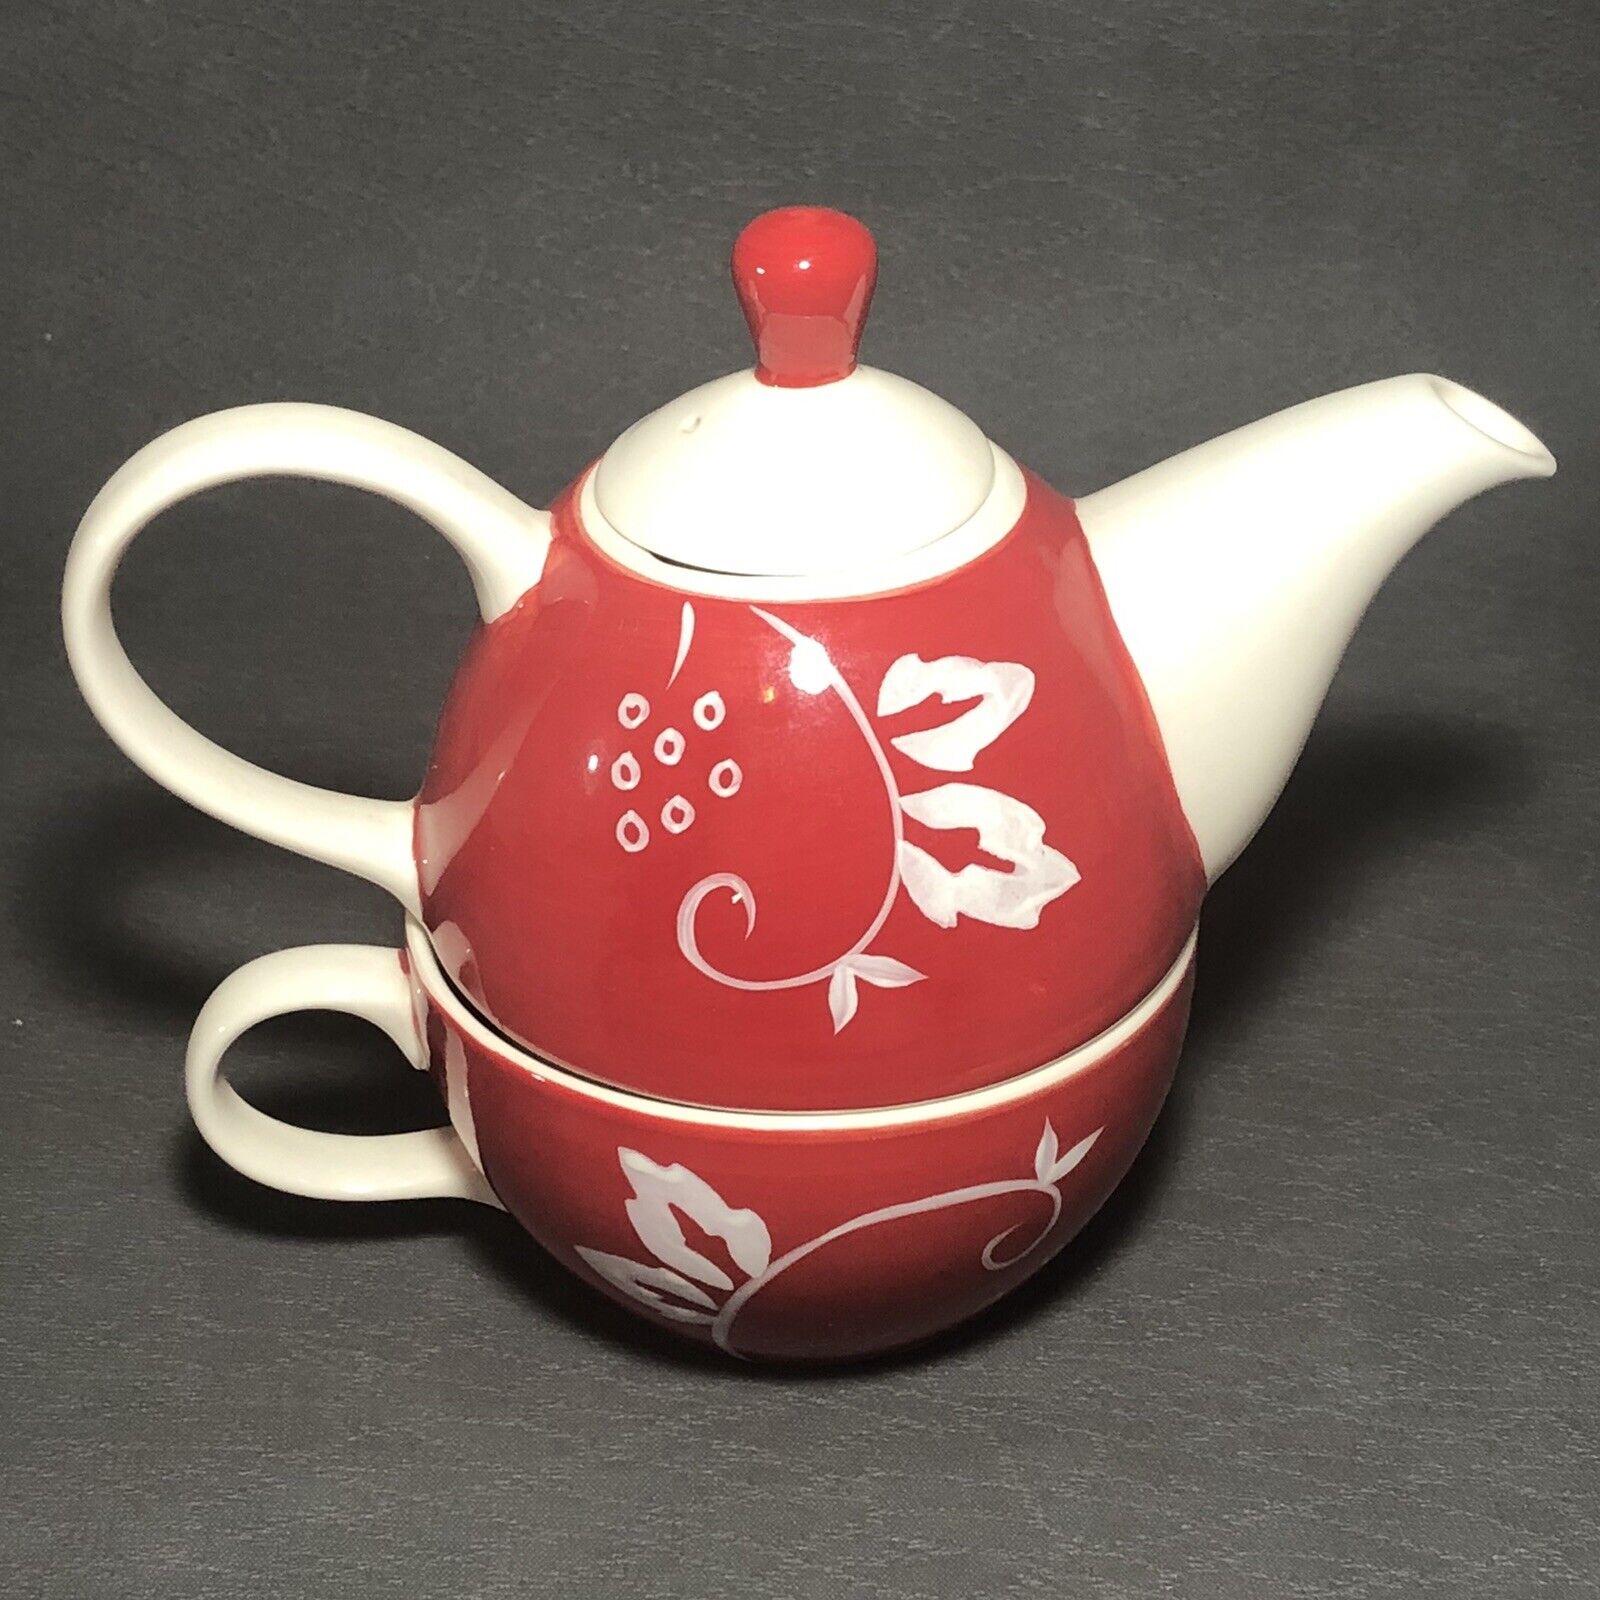 Hues N Brews Red & White Floral Service for One Teapot with Lid and Cup -3 Piece